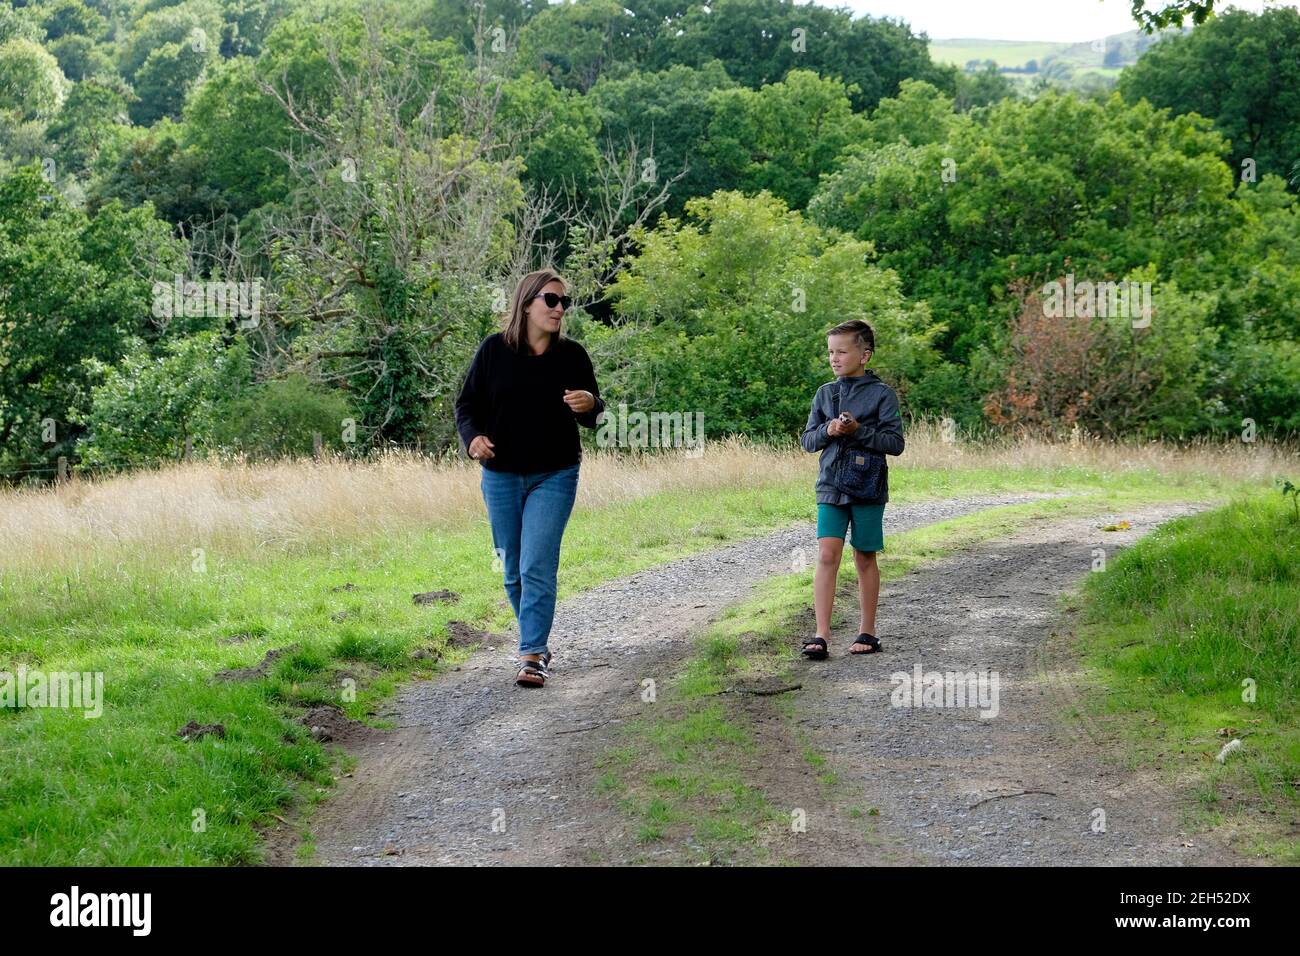 Mother and son talking walking along a country track on road lane path in rural Welsh summer countryside trees Carmarthenshire Wales UK KATHY DEWITT Stock Photo